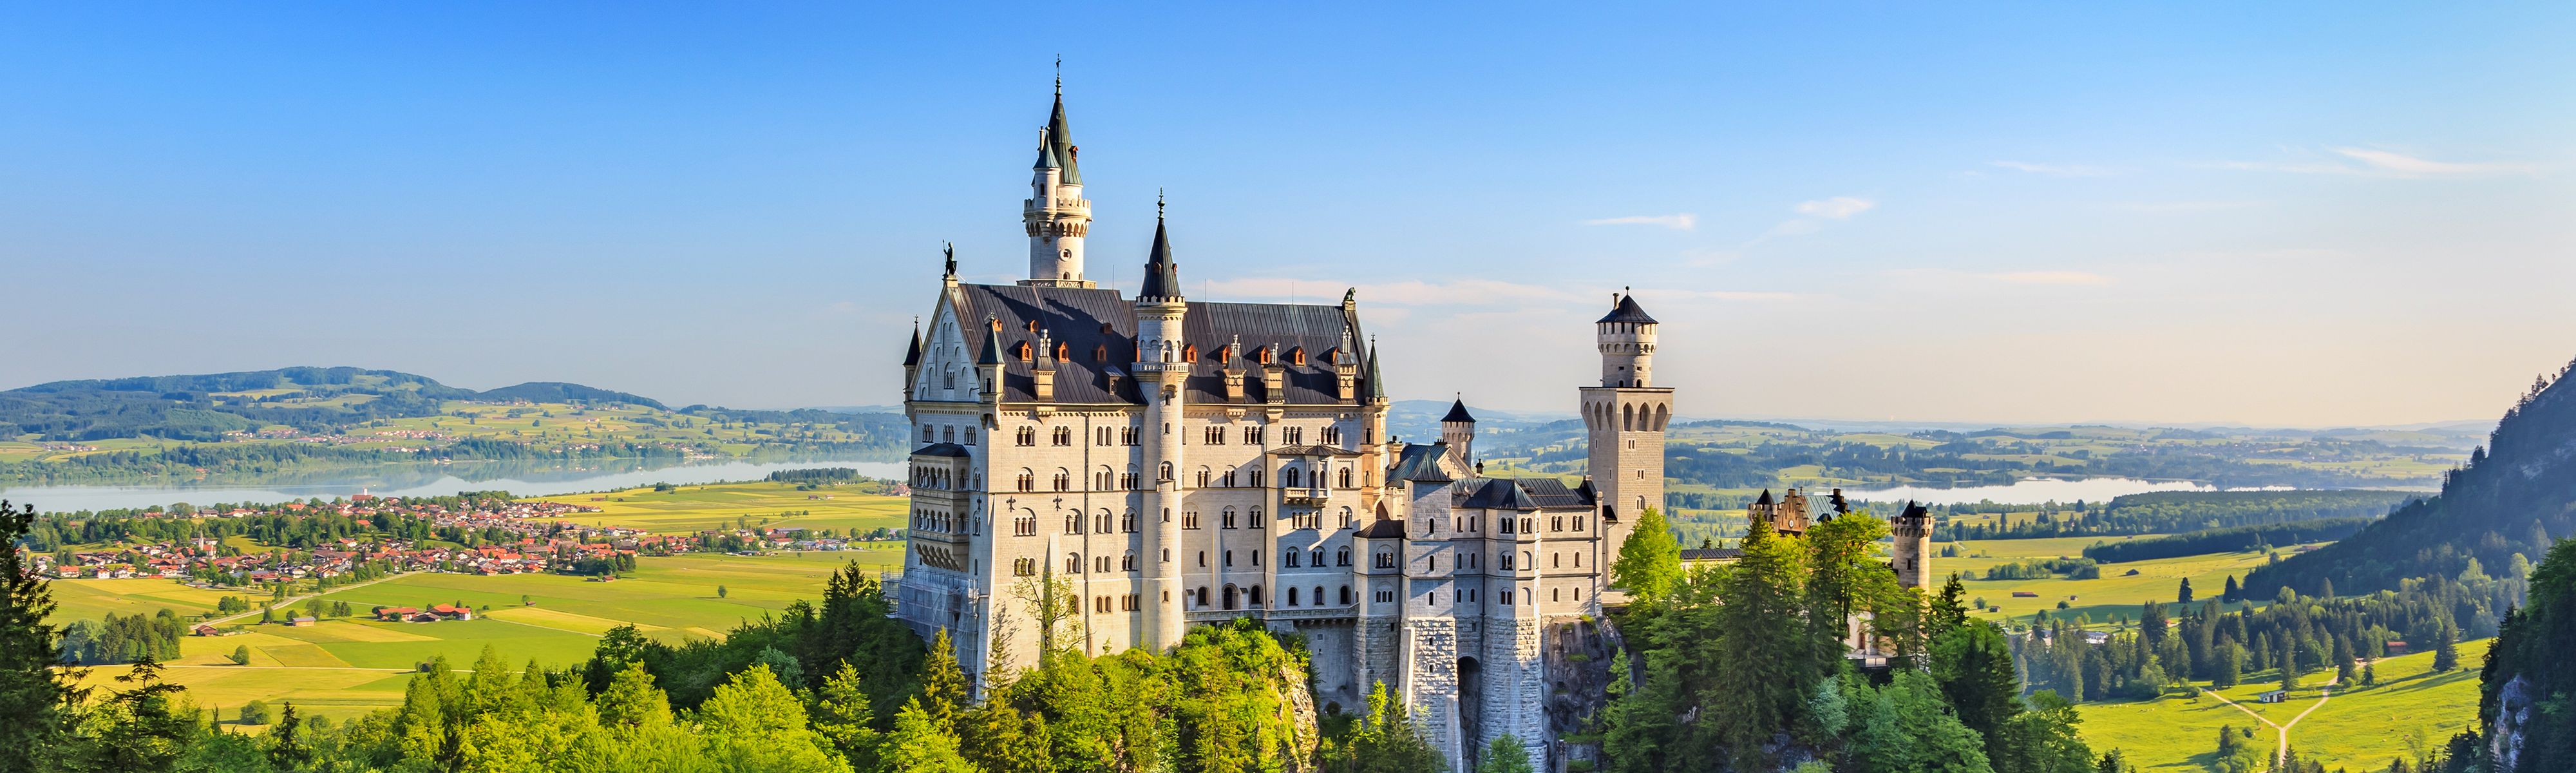 guided tours of germany and austria